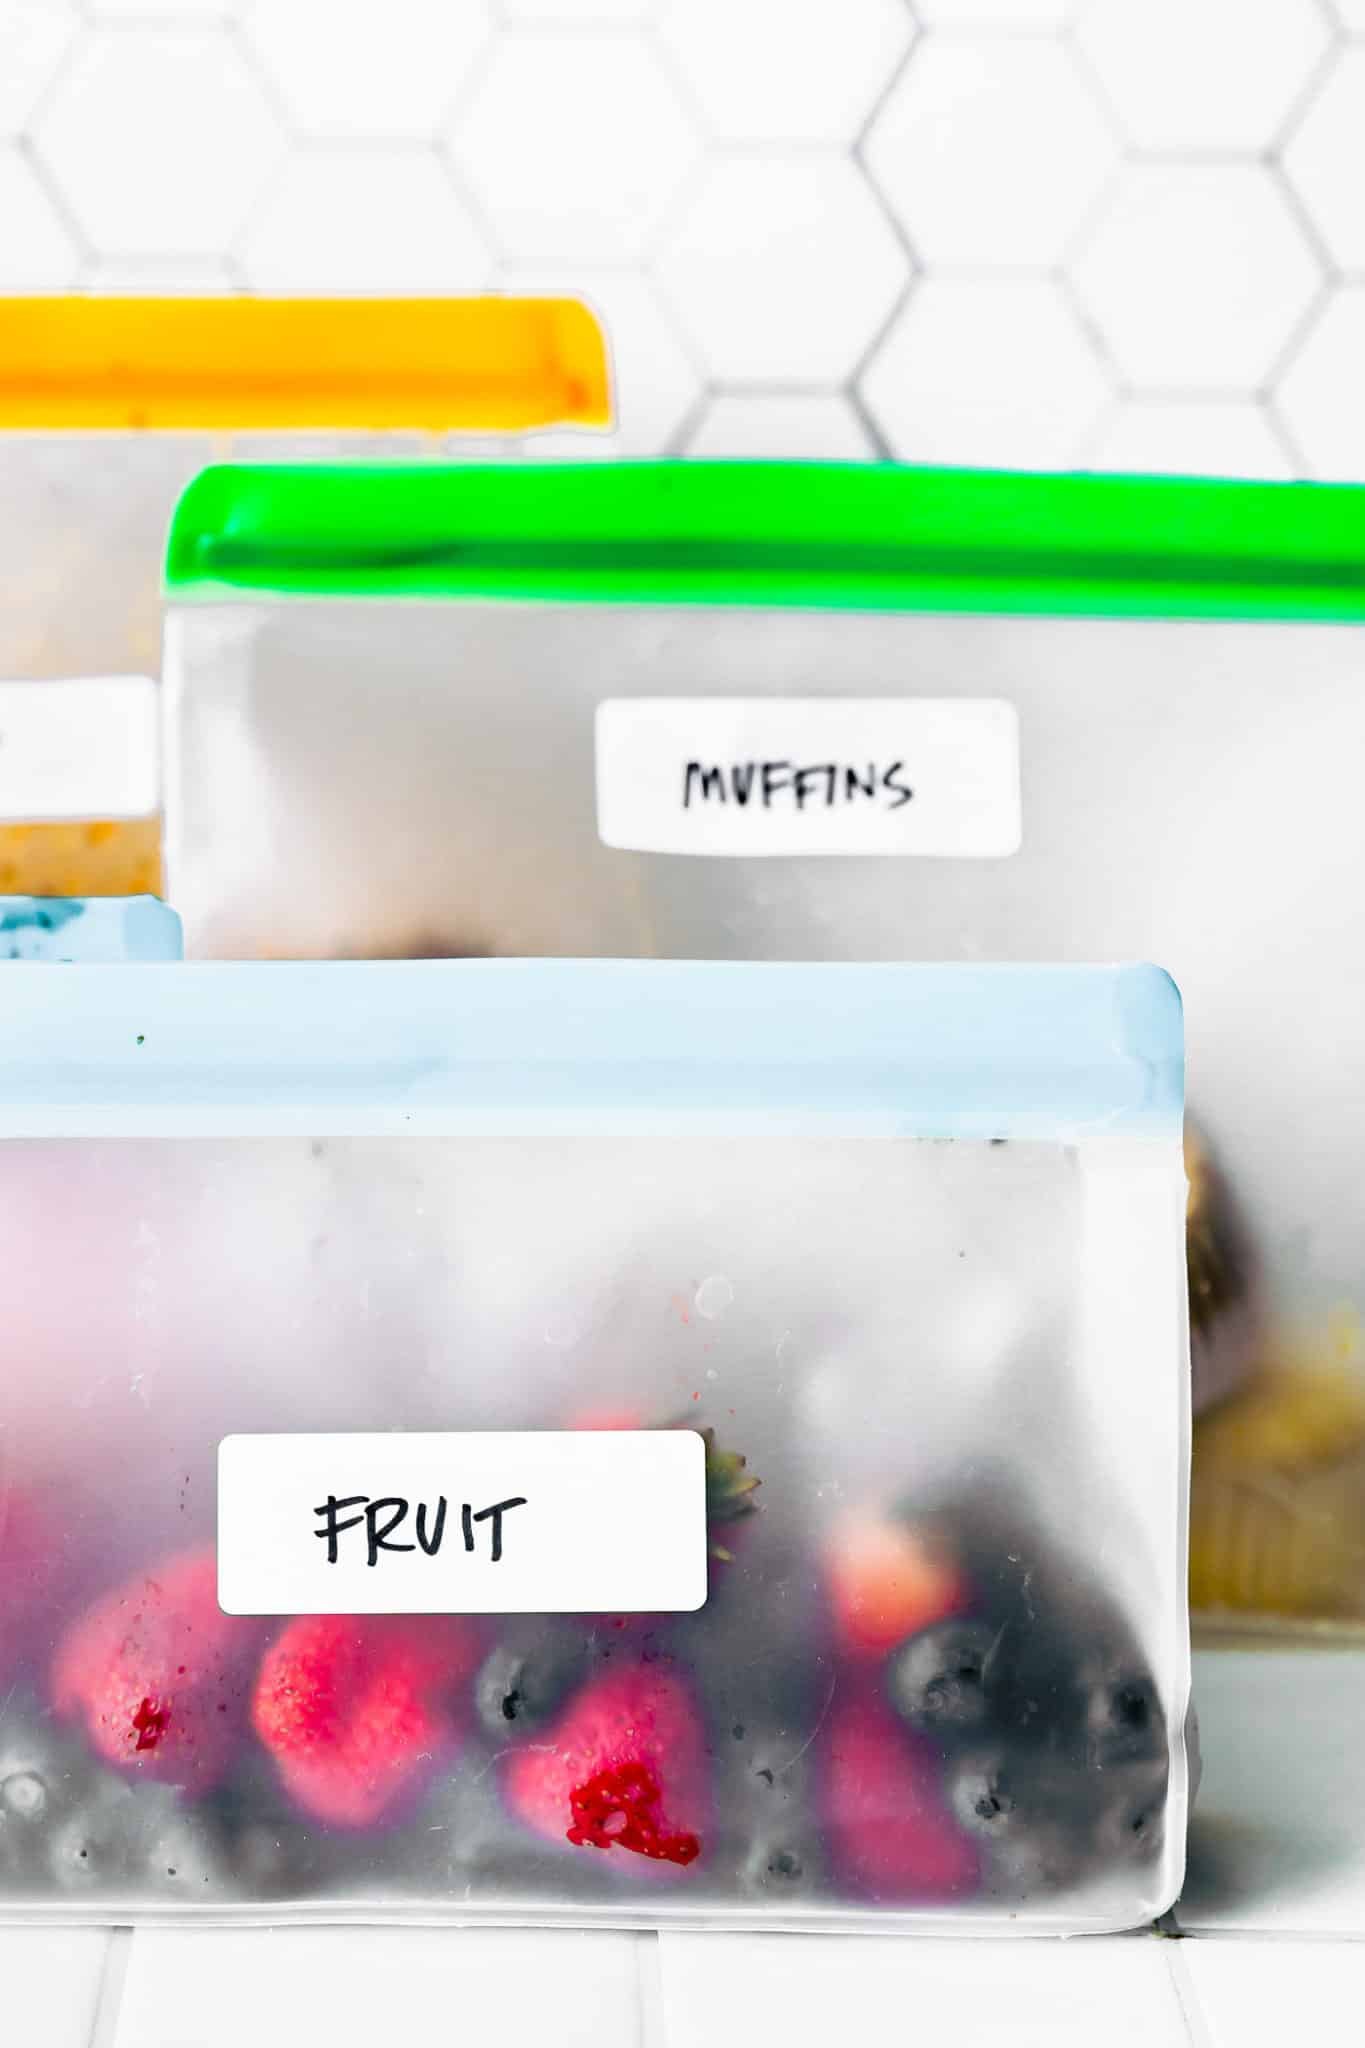 freezer bags labeled fruit and muffins